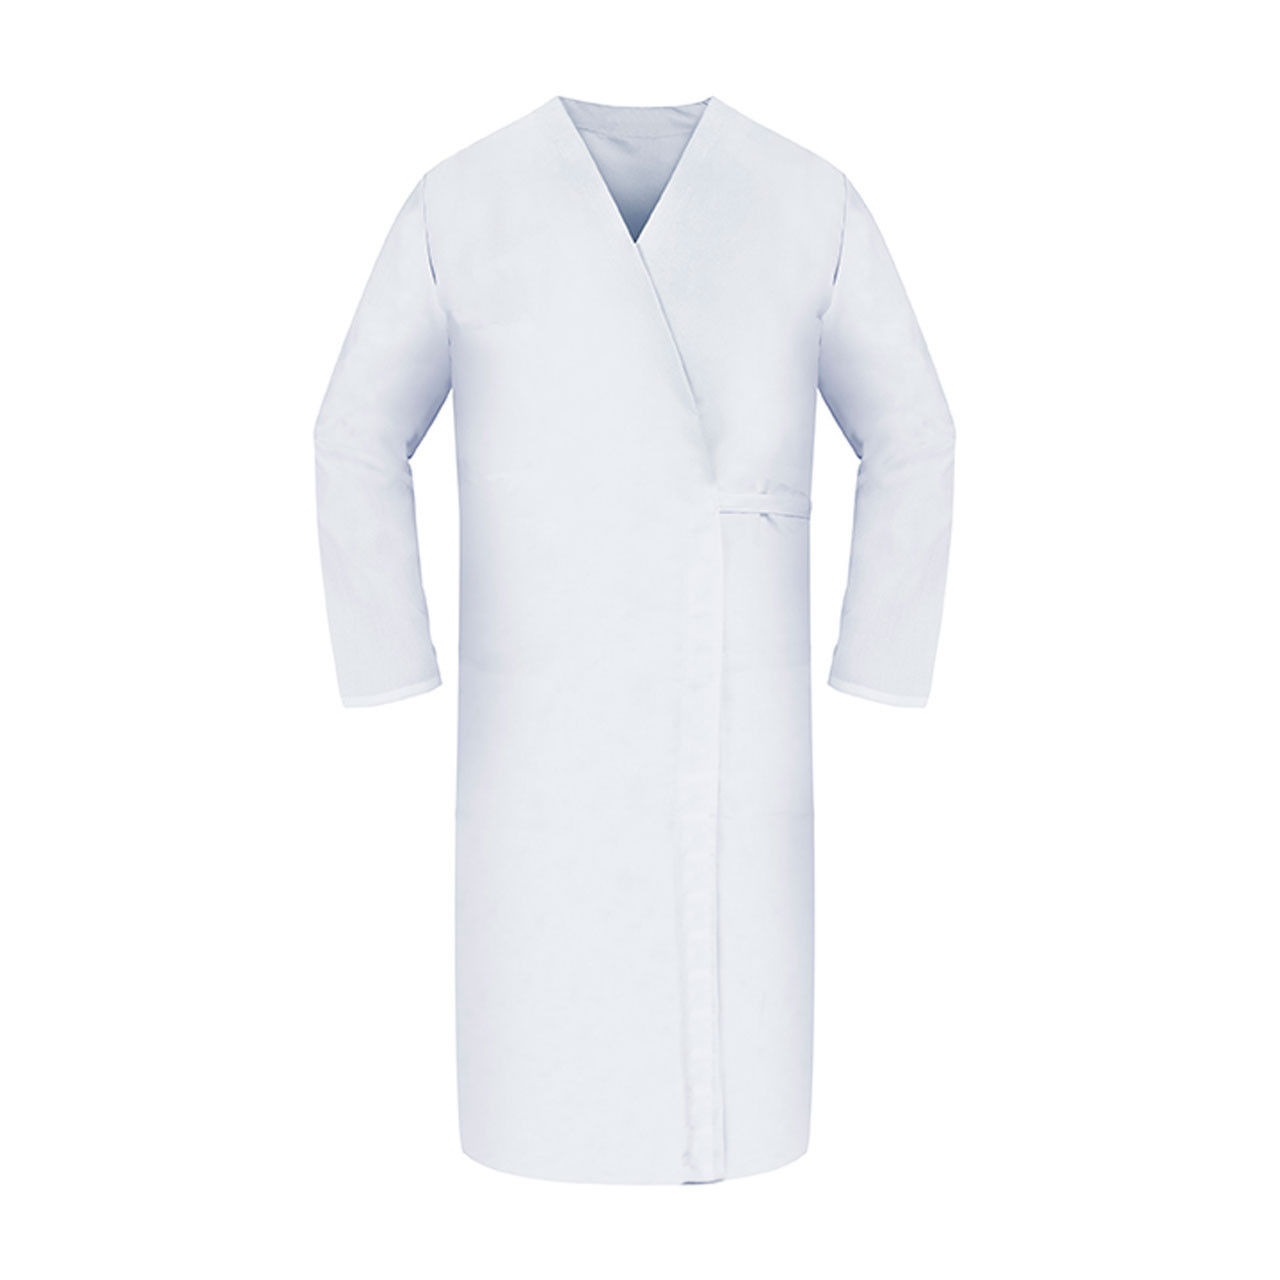 Can you confirm if the color of the white smock is indeed the HACCP LS Smock Wrap?